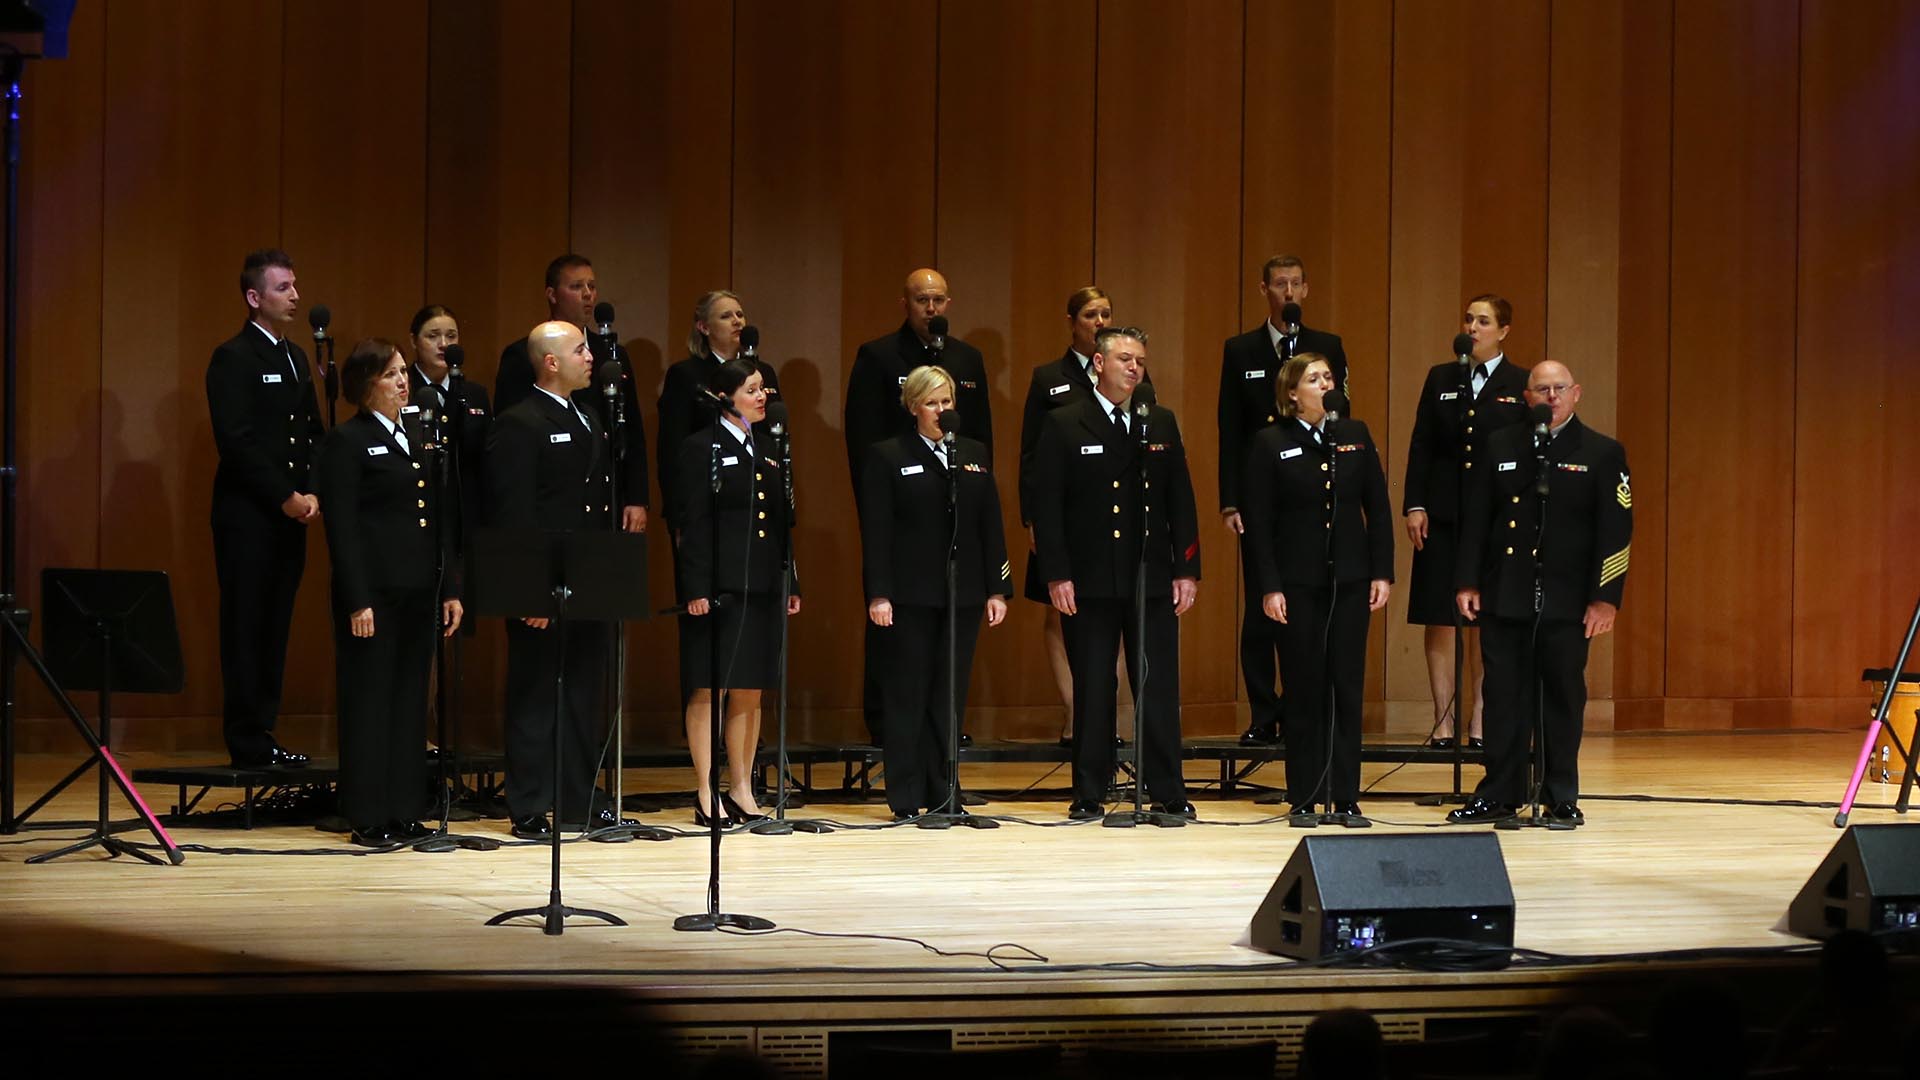 Sea Chanters performing on stage at the Nancy R. and Norton T. Dodge auditorium.